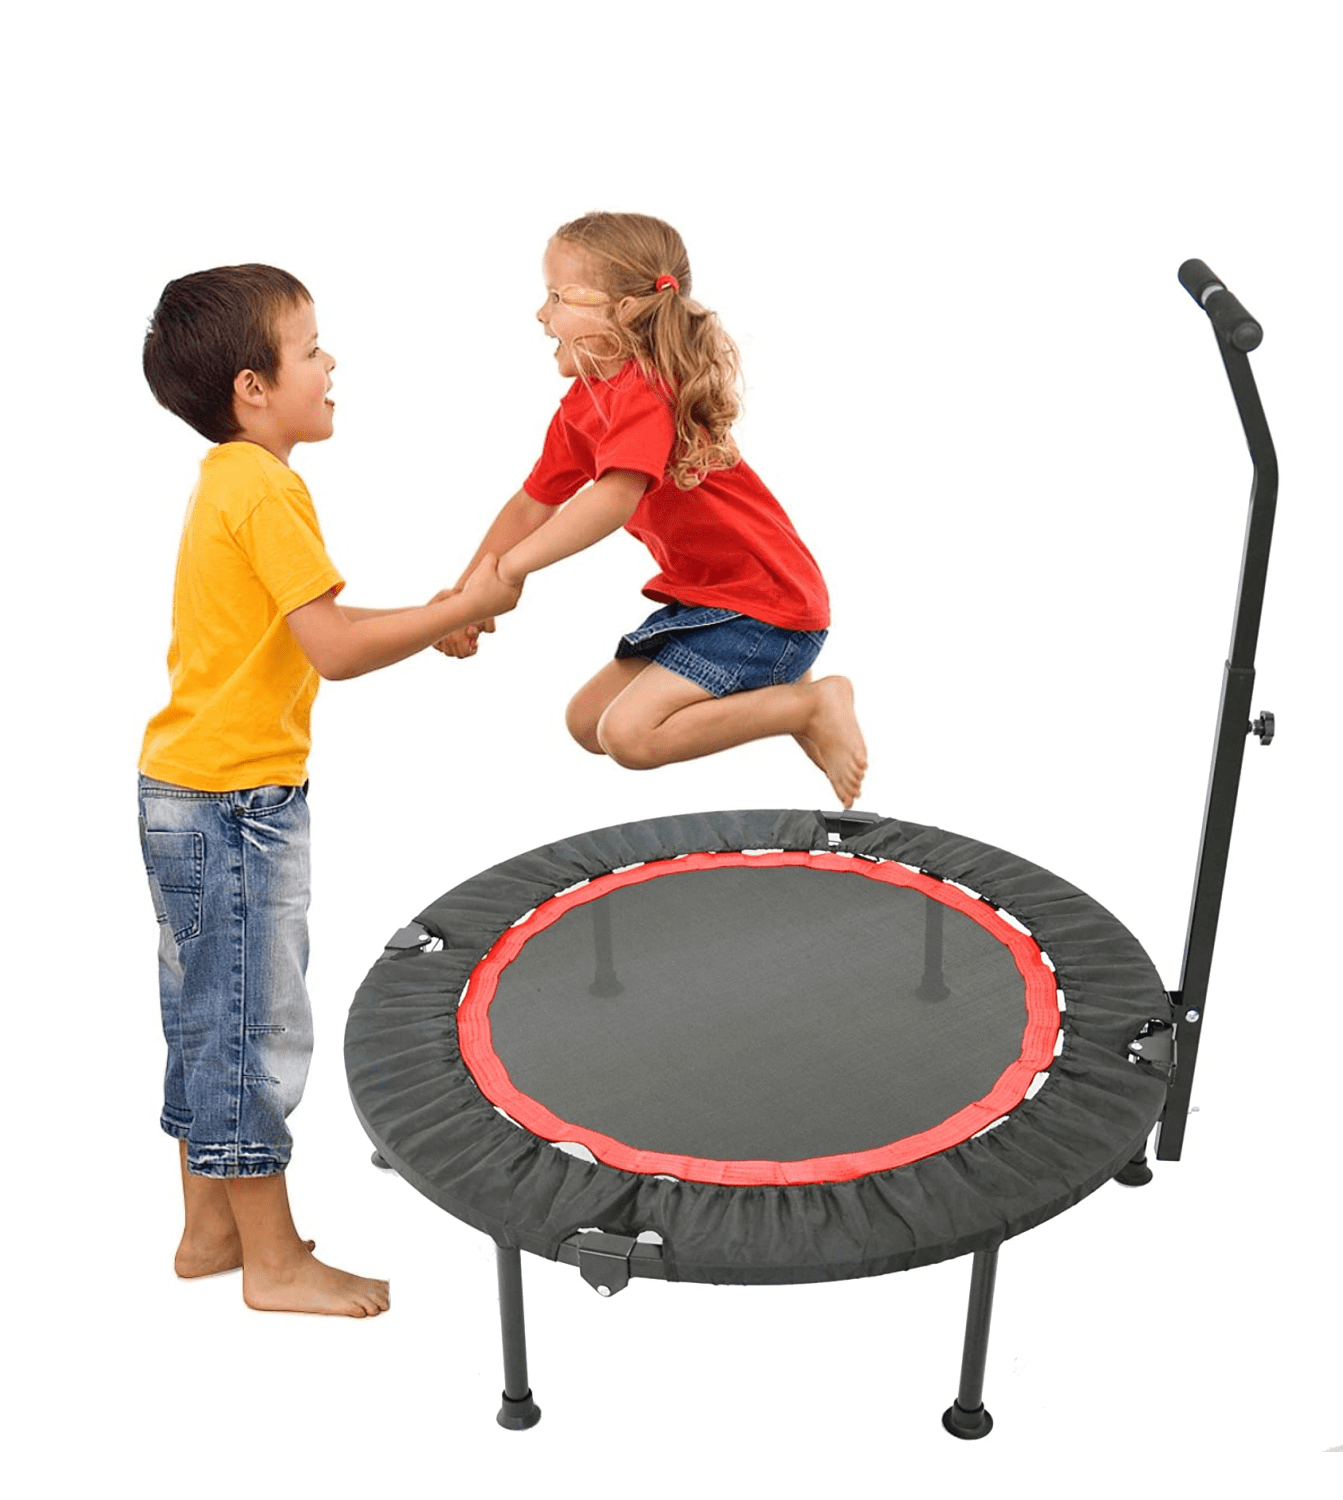 Max Load 330 lbs Foldable & Portable Exercise Bouncer with Carrying Bag and Safety Pad Indoor Outdoor Jumping Cardio Trainer Workout for Kids Adults 40” Mini Fitness Rebounder 